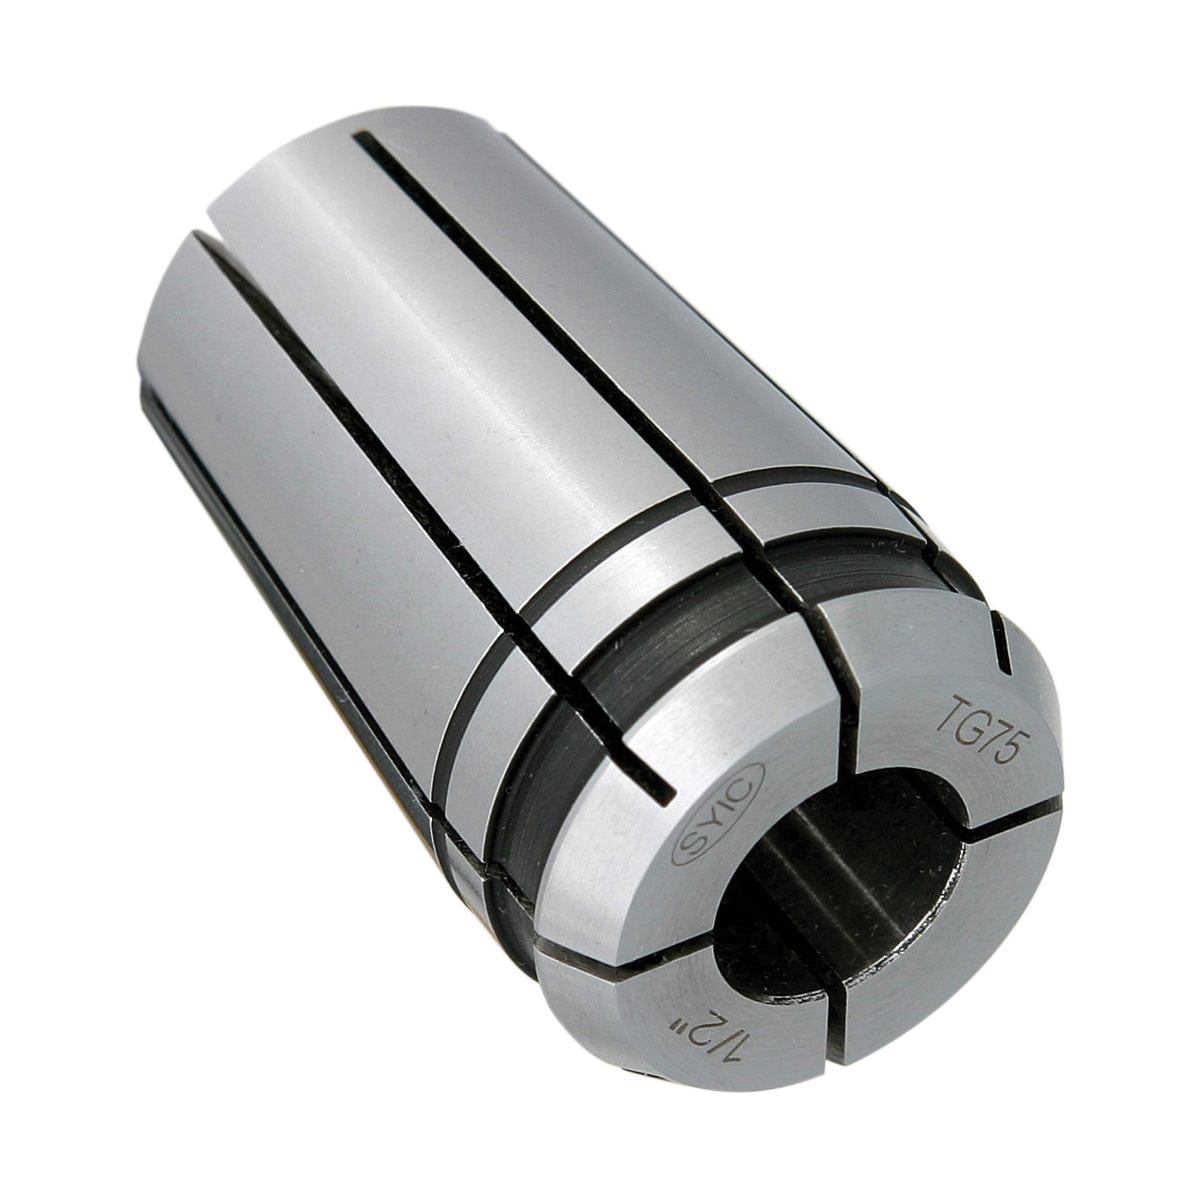 TG75 13/64" COLLET